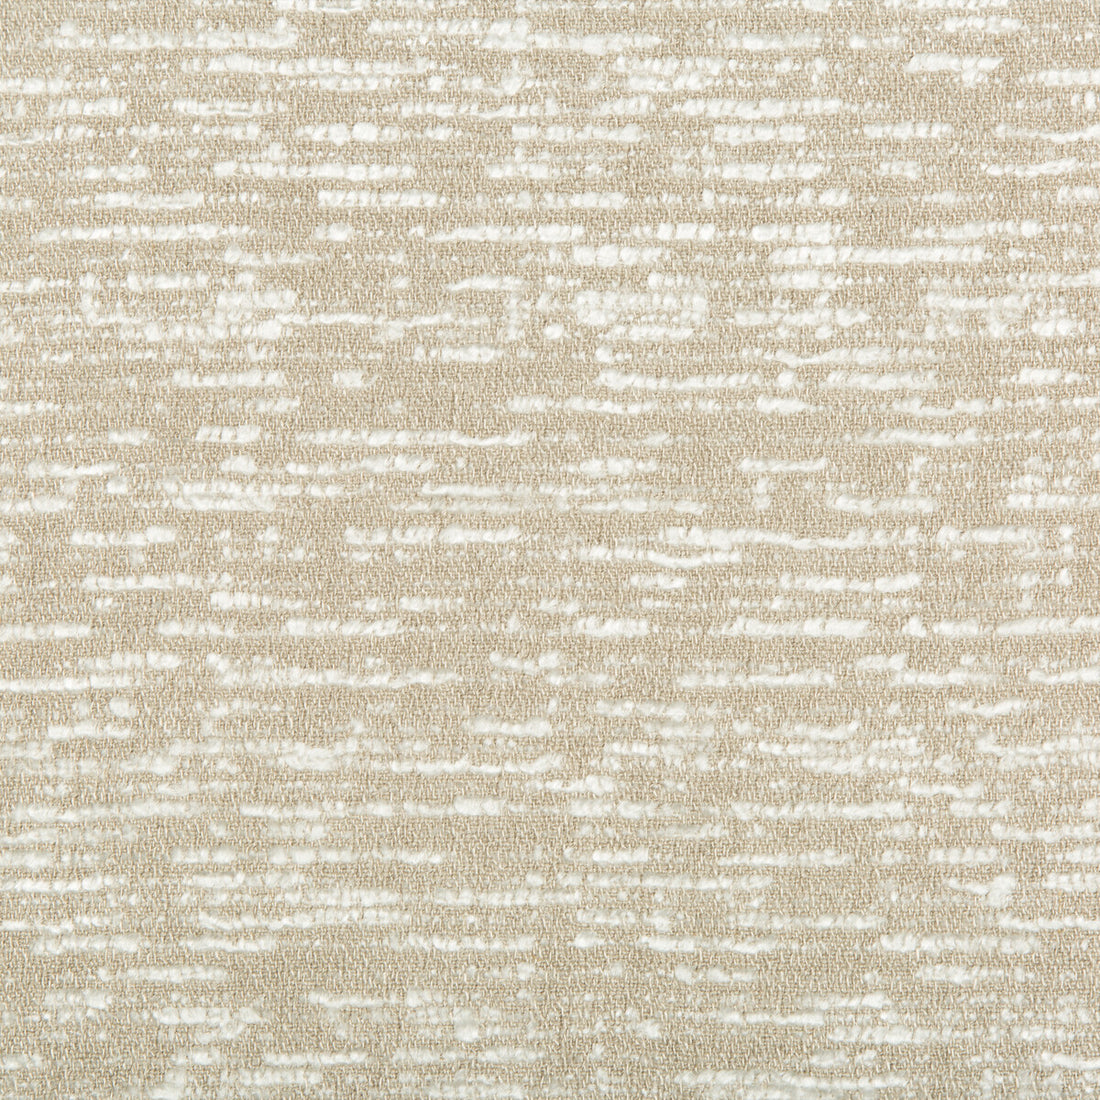 Topia Texture fabric in linen color - pattern 34951.16.0 - by Kravet Couture in the Sue Firestone Malibu collection